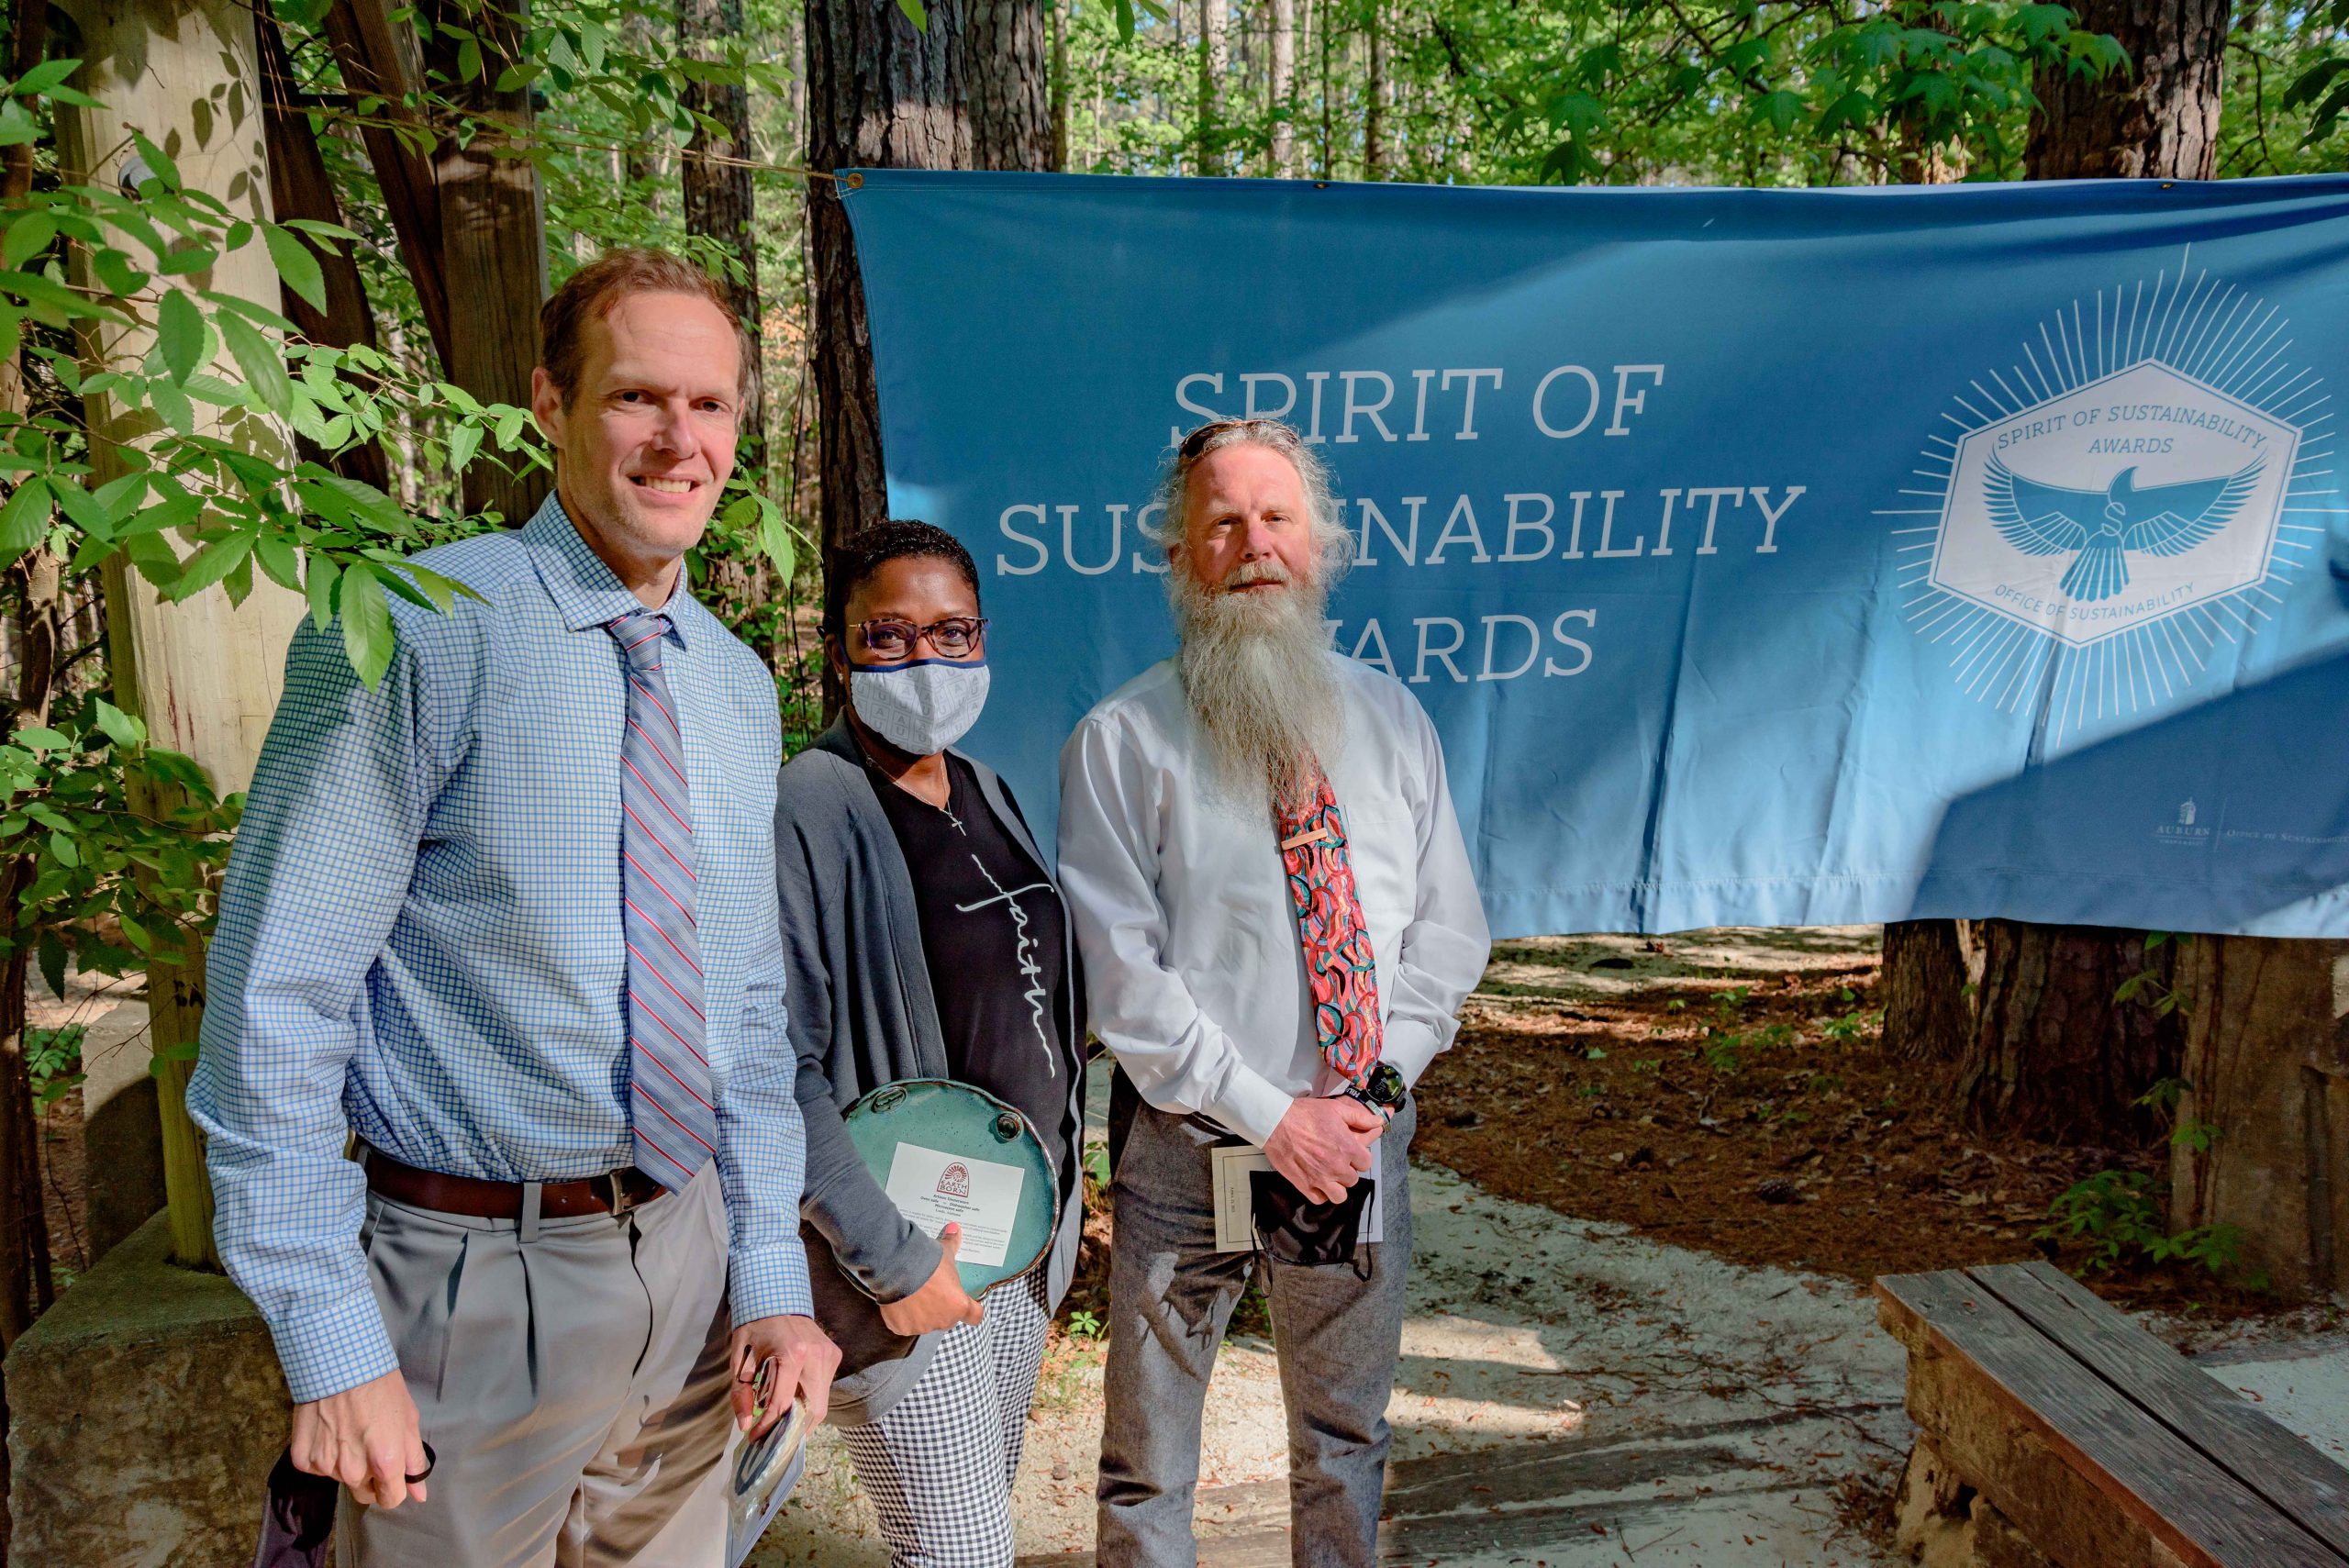 Staff from Student Counseling and Psychological Services with their Spirit of Sustainability Award